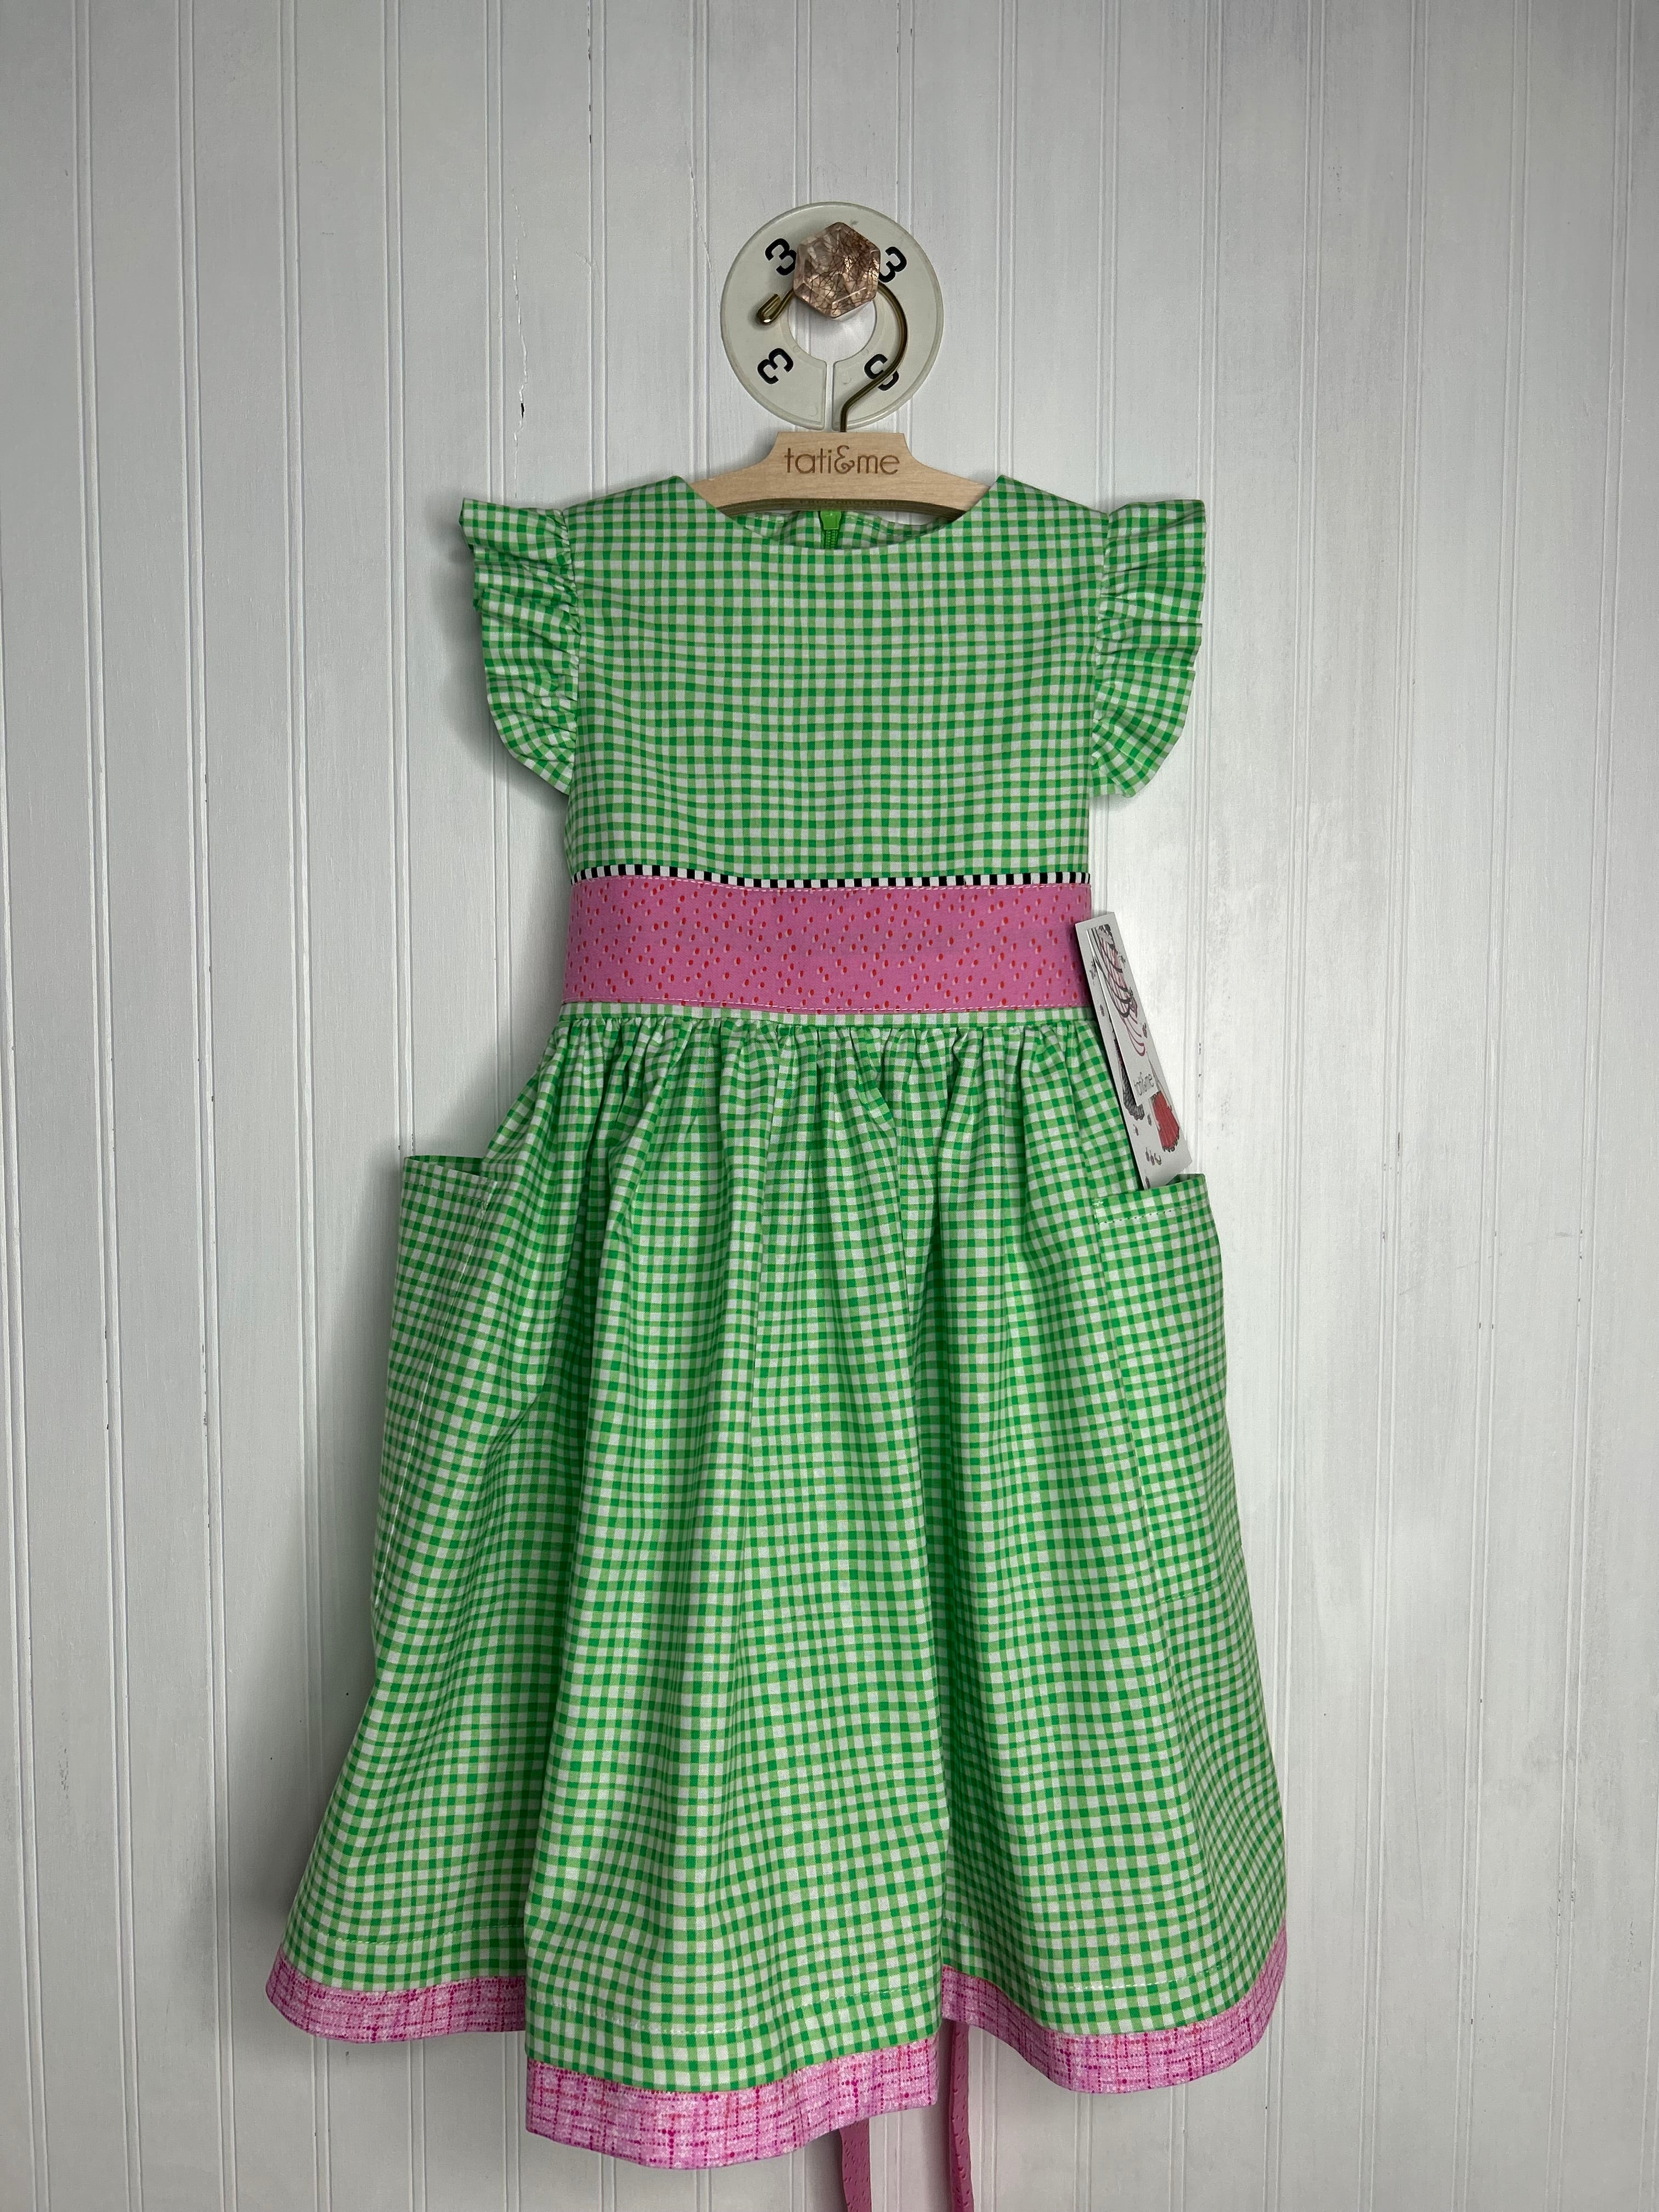 Mint Gingham Pocket Dress- 3 years old